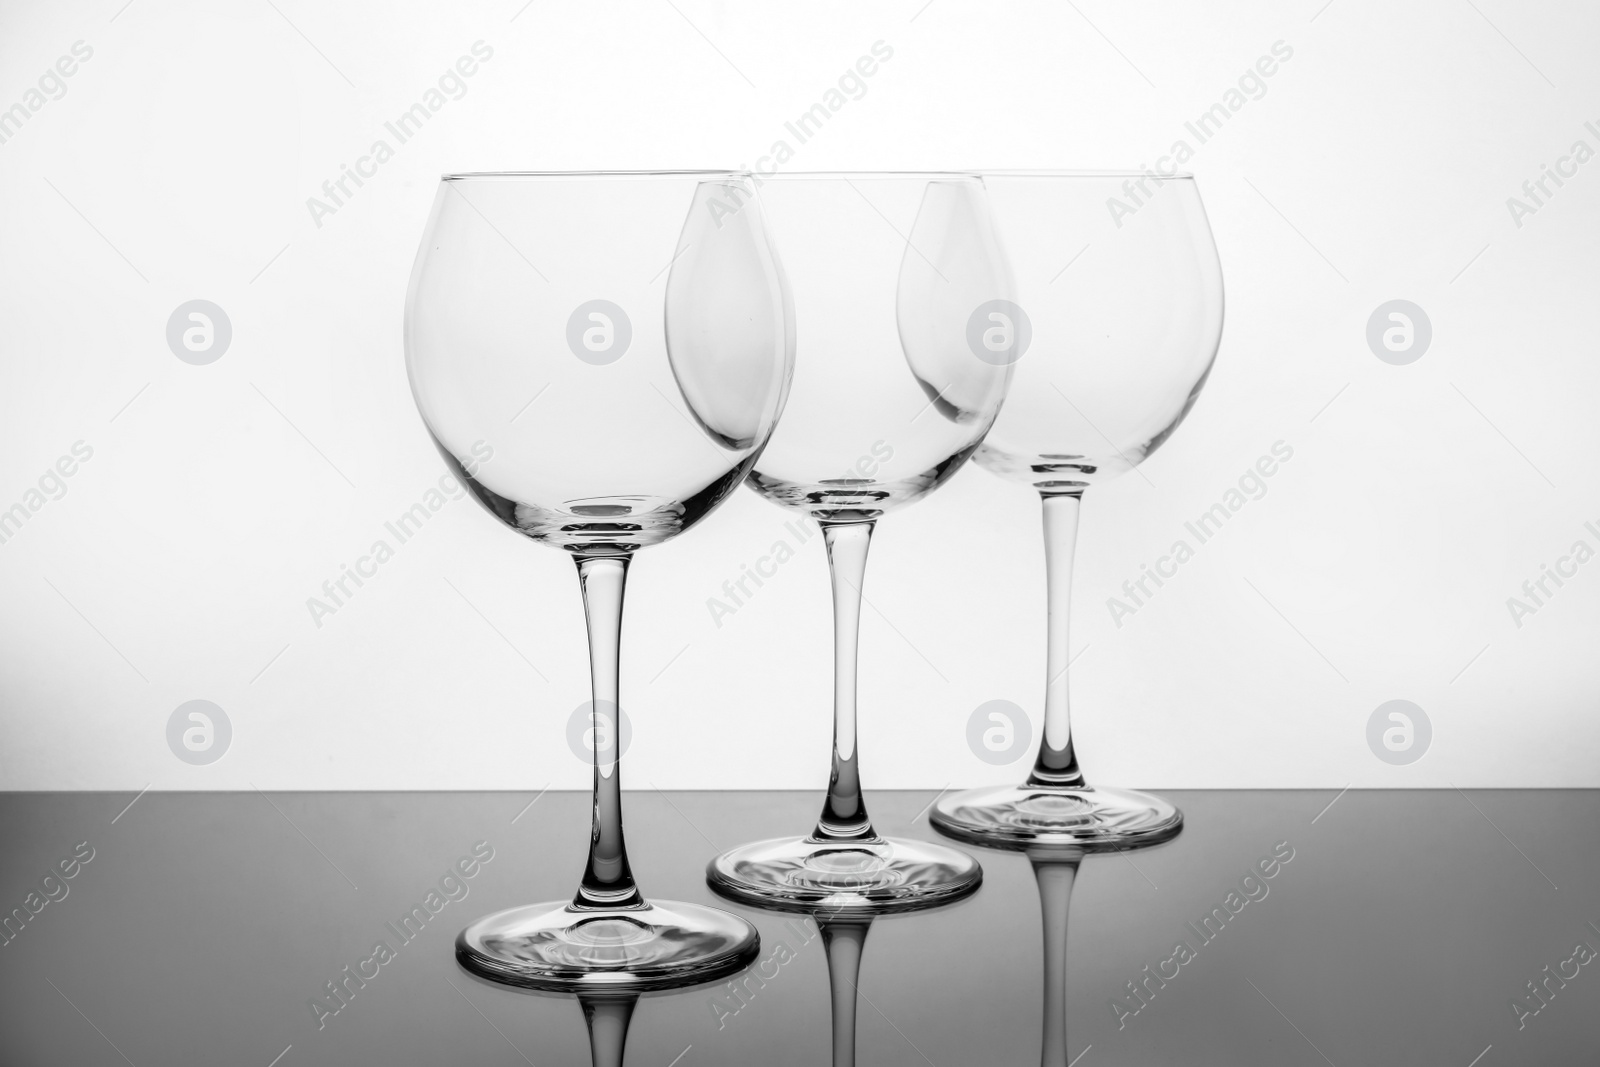 Photo of Row of empty wine glasses on white background